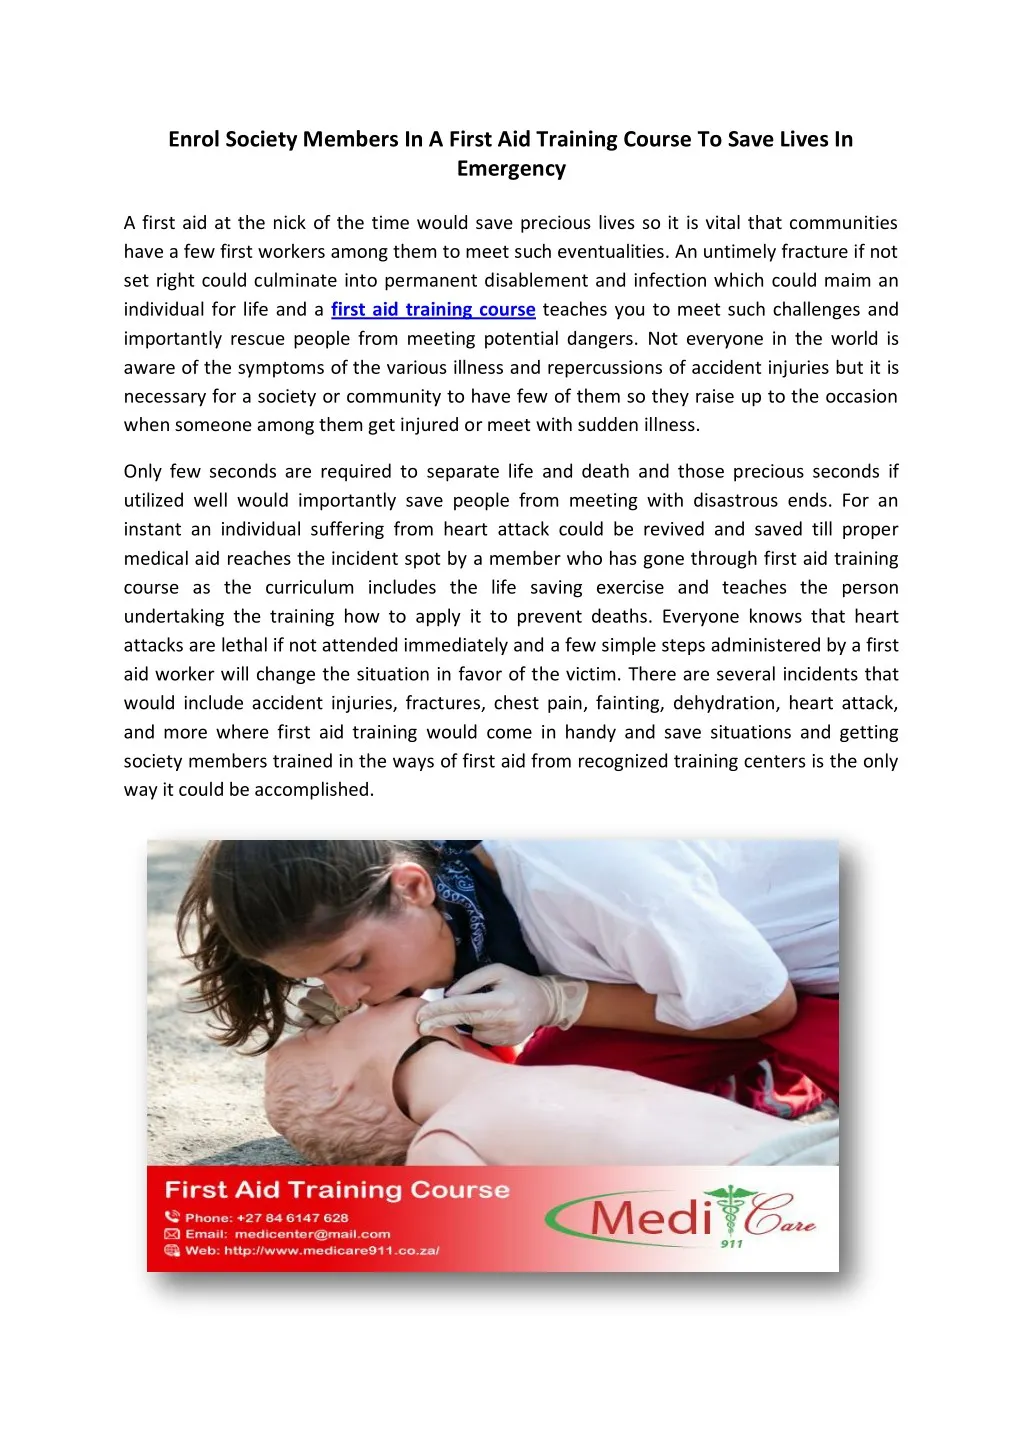 enrol society members in a first aid training